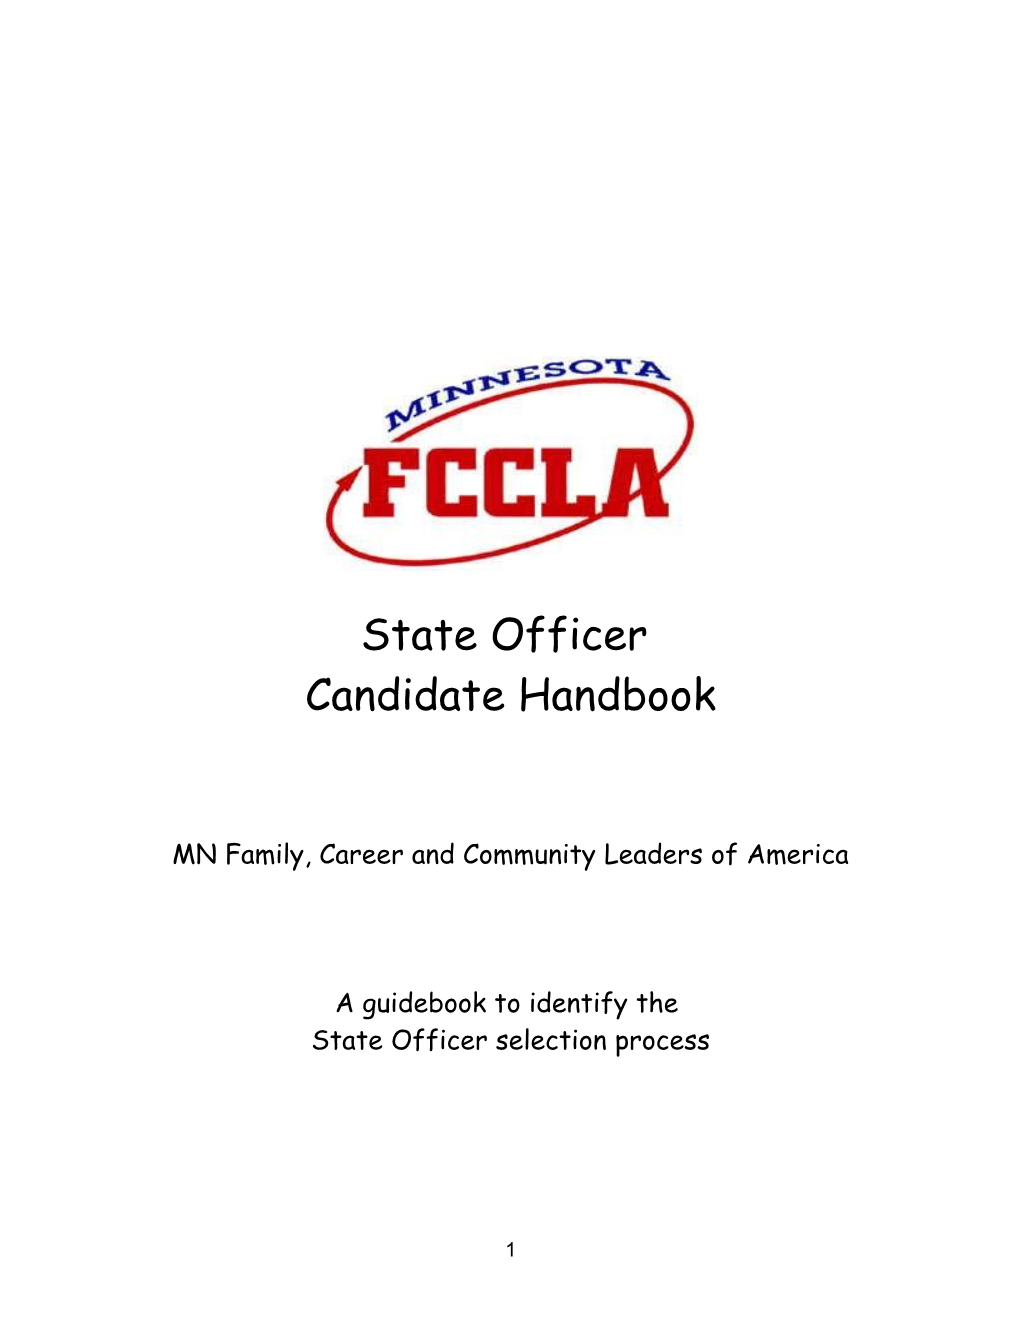 Process of Selecting New MN FCCLA State Officers